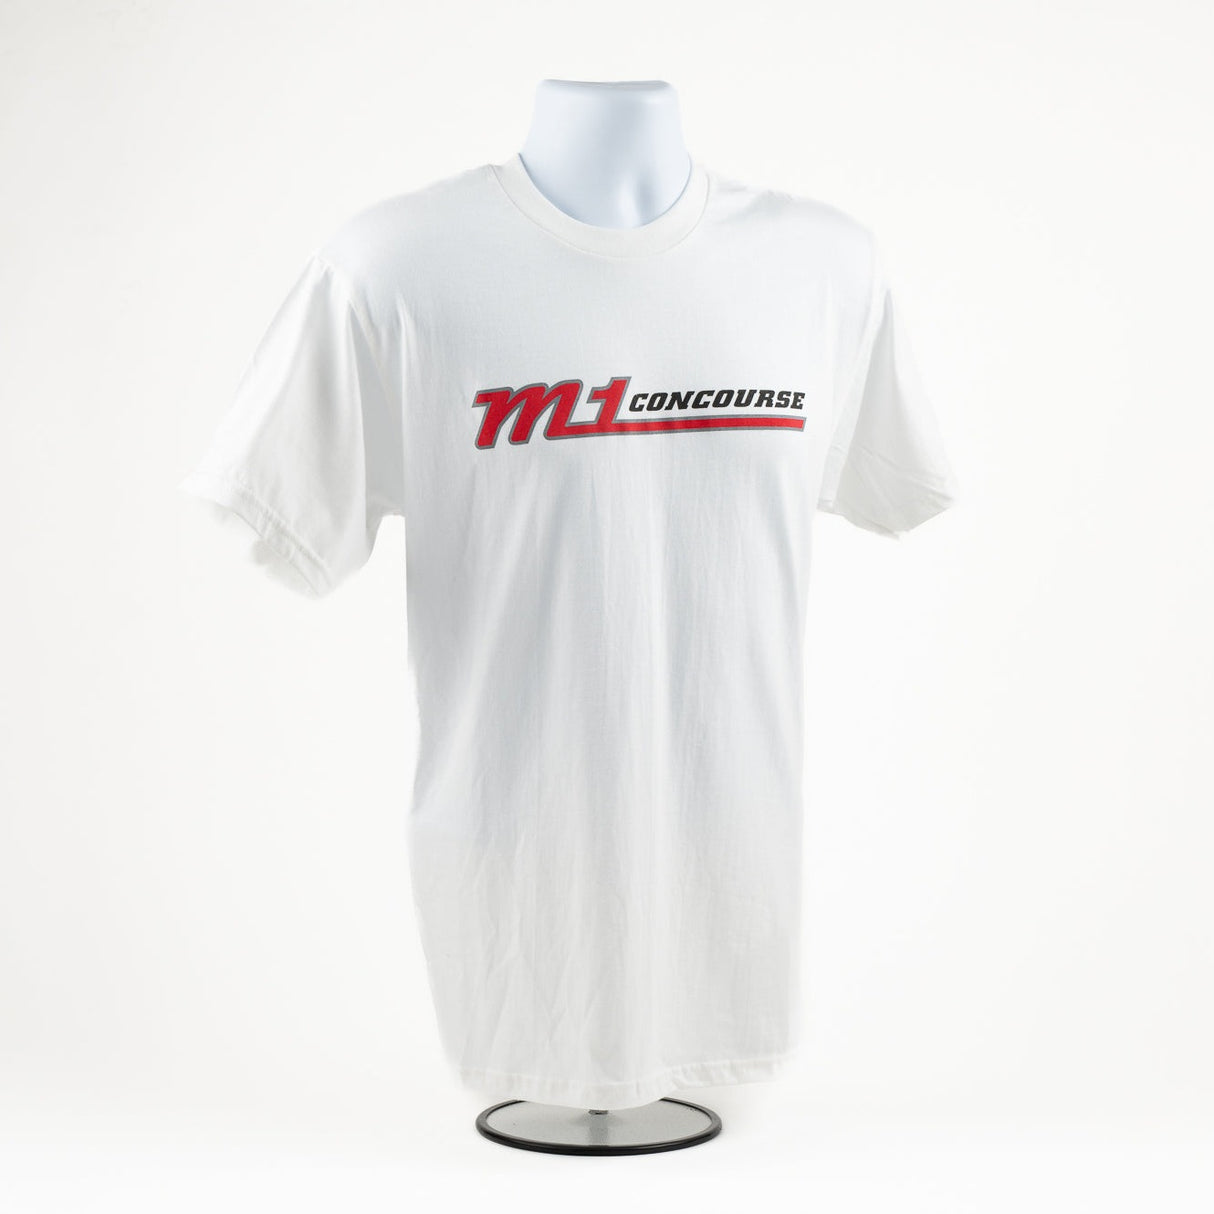 Short Sleeve T Shirt M1 Concourse with M1 Street Sign